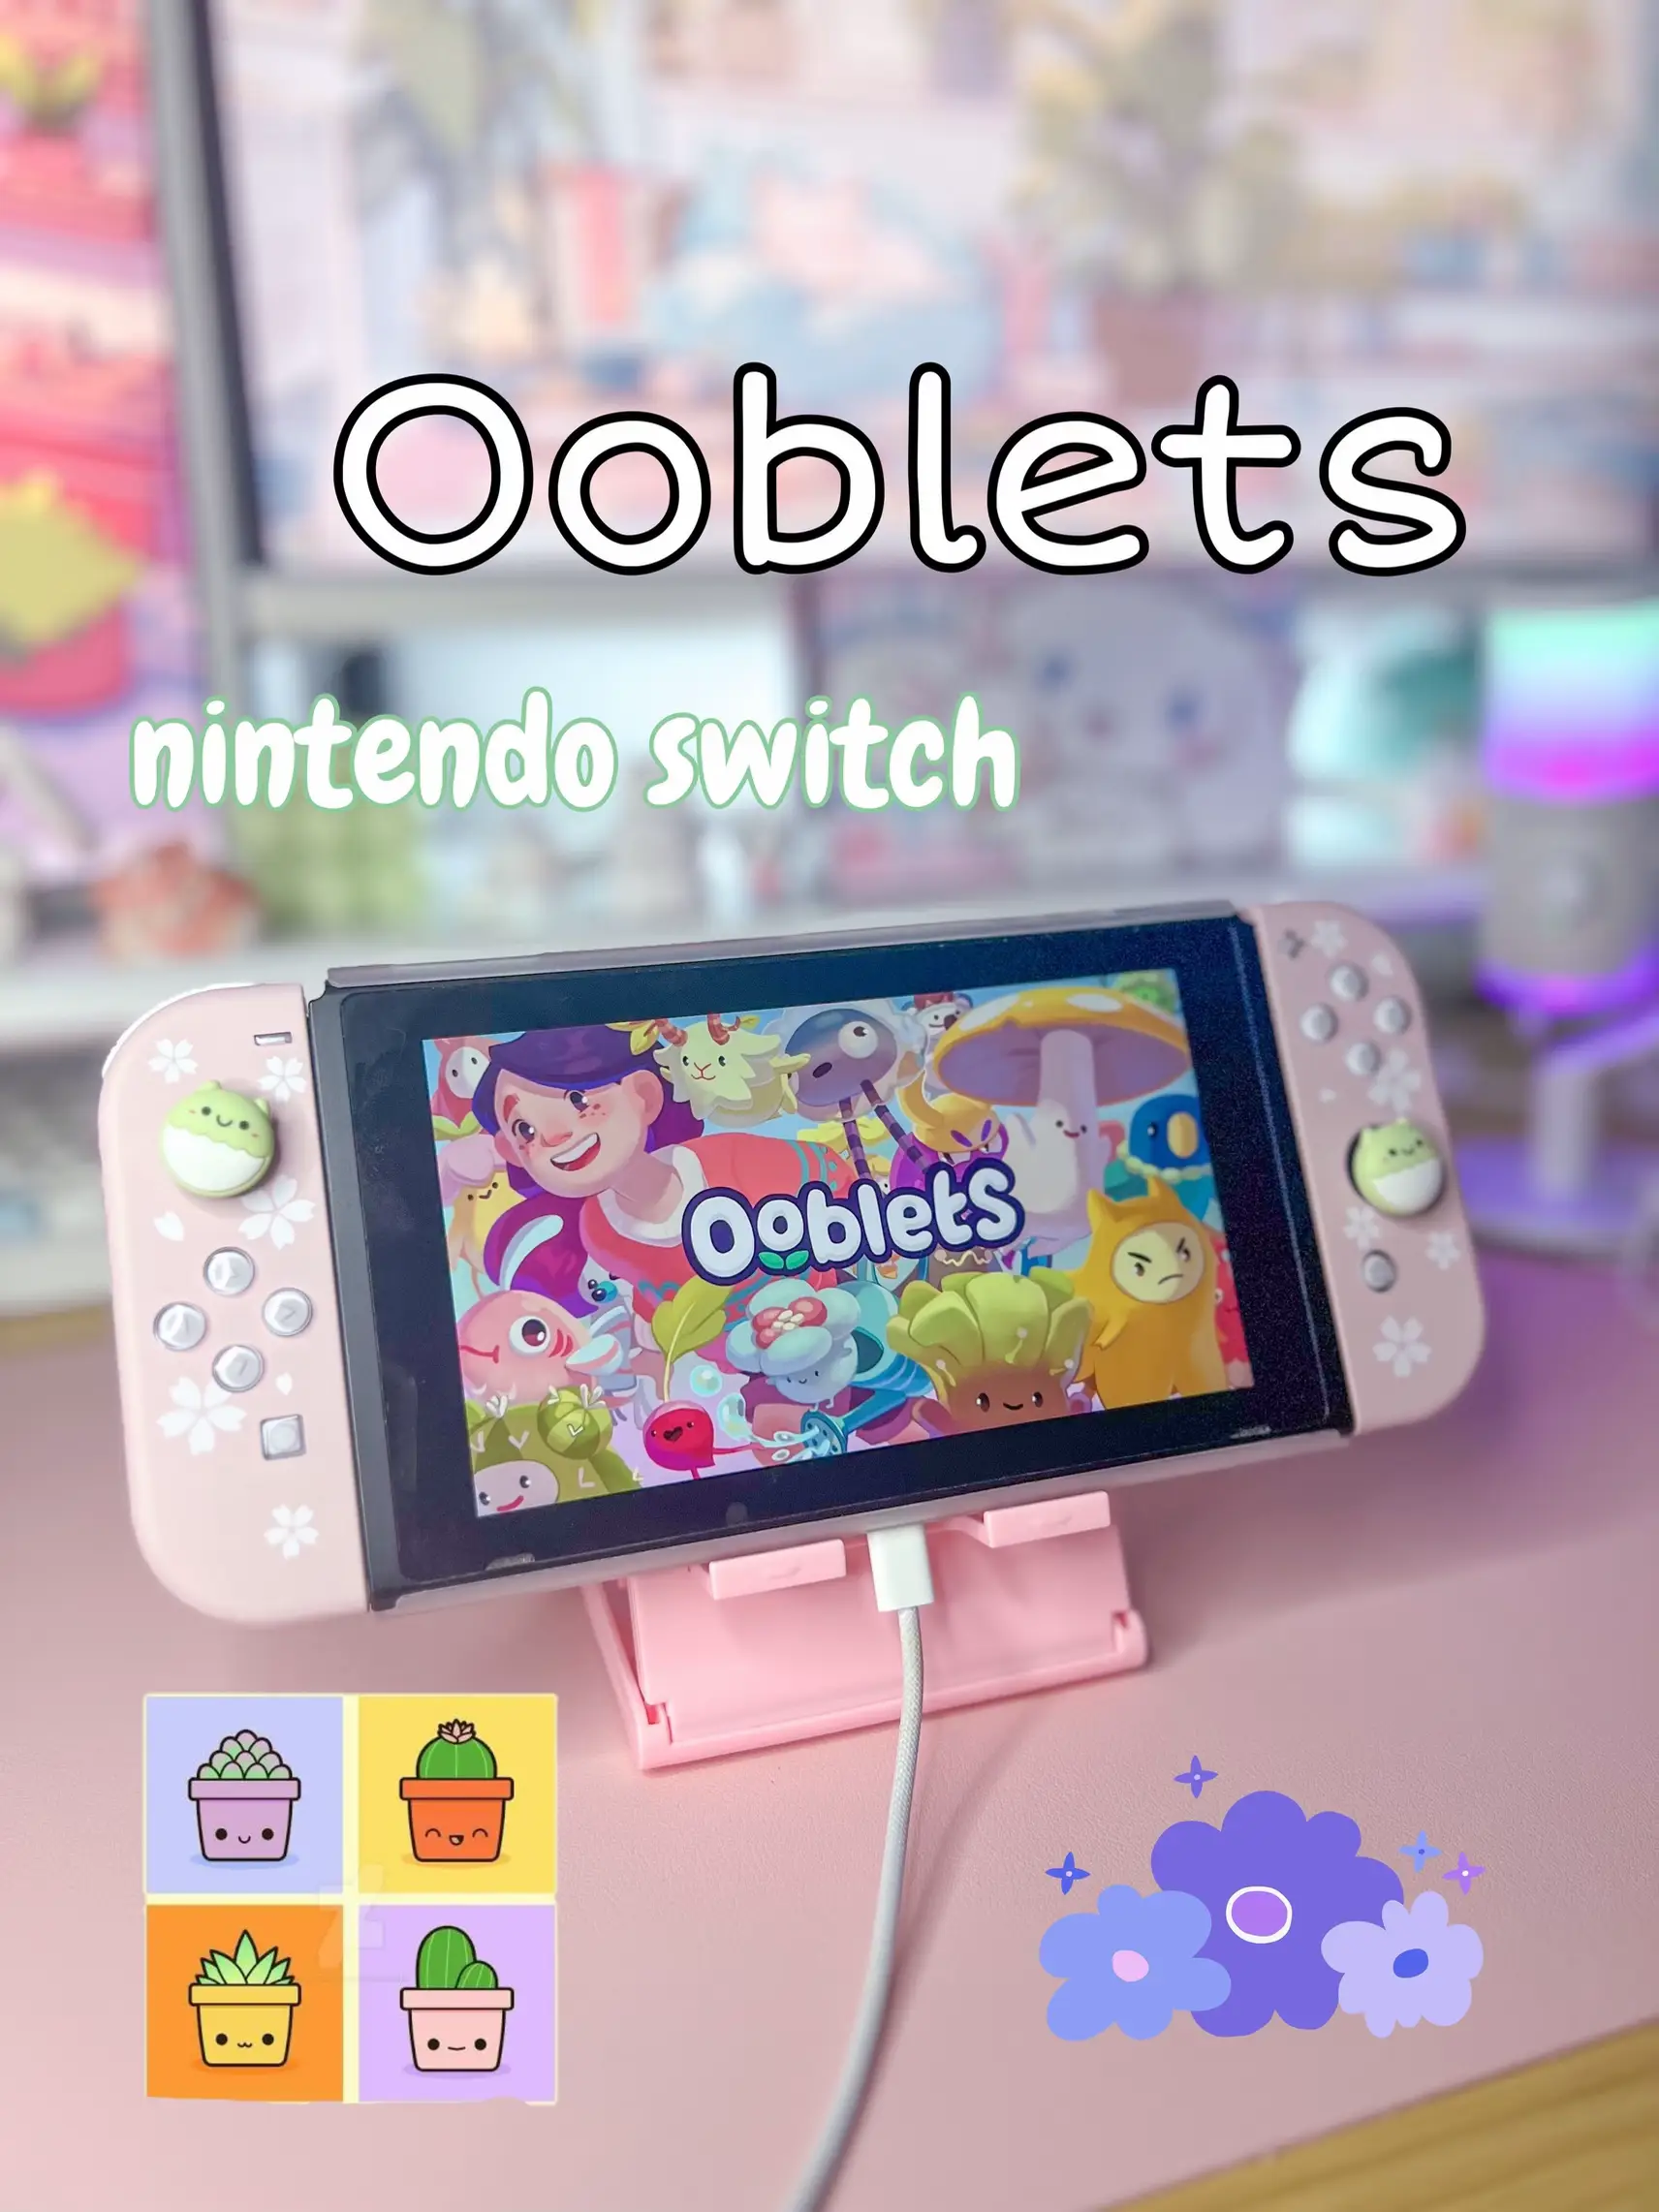 | Lemon8 nikki Gallery ooblets nintendo by switch | posted